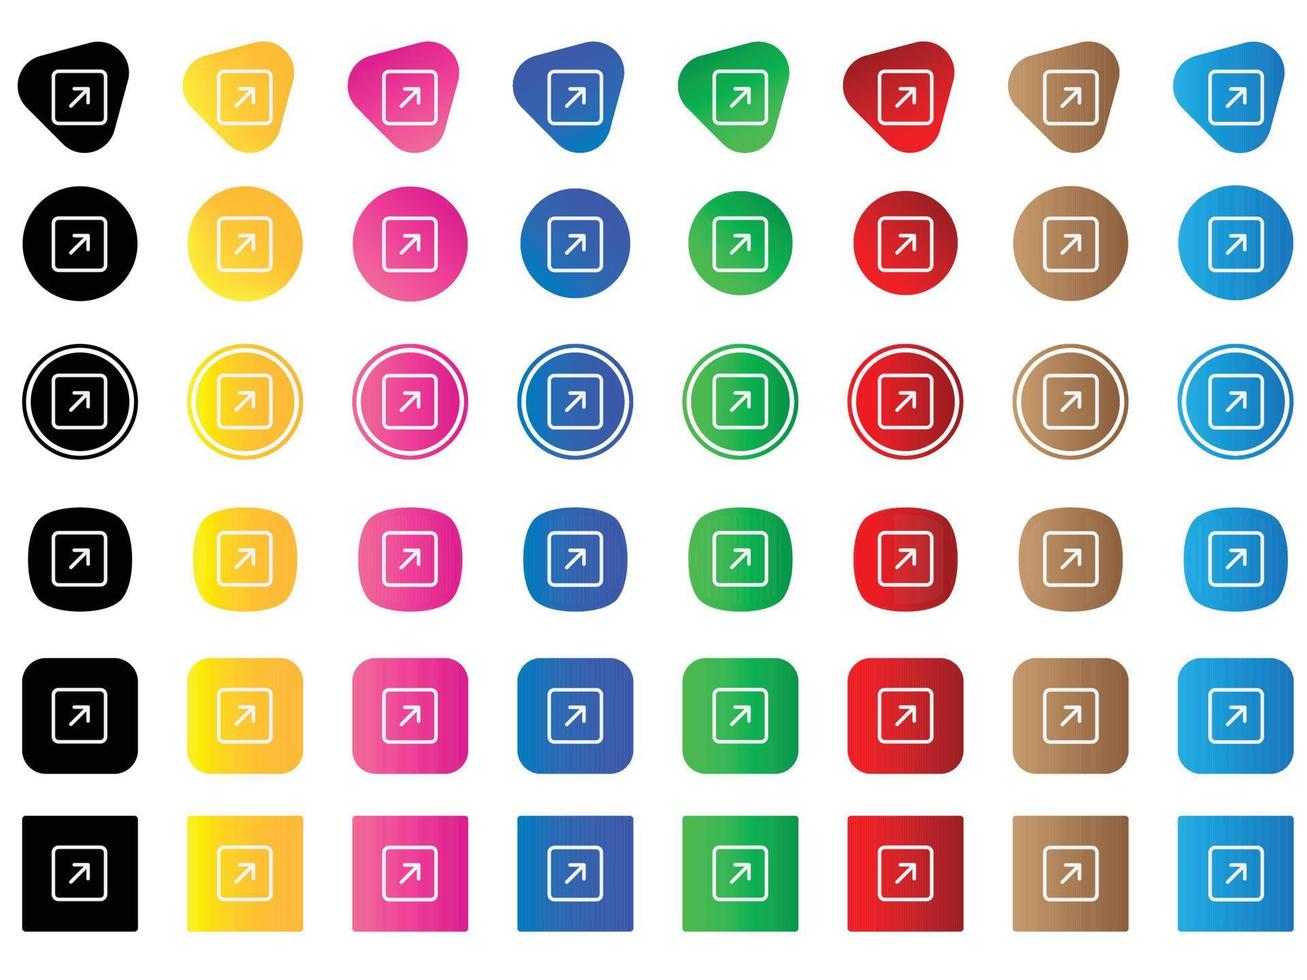 arrow up right square icon . web icon set . icons collection. Simple vector illustration.